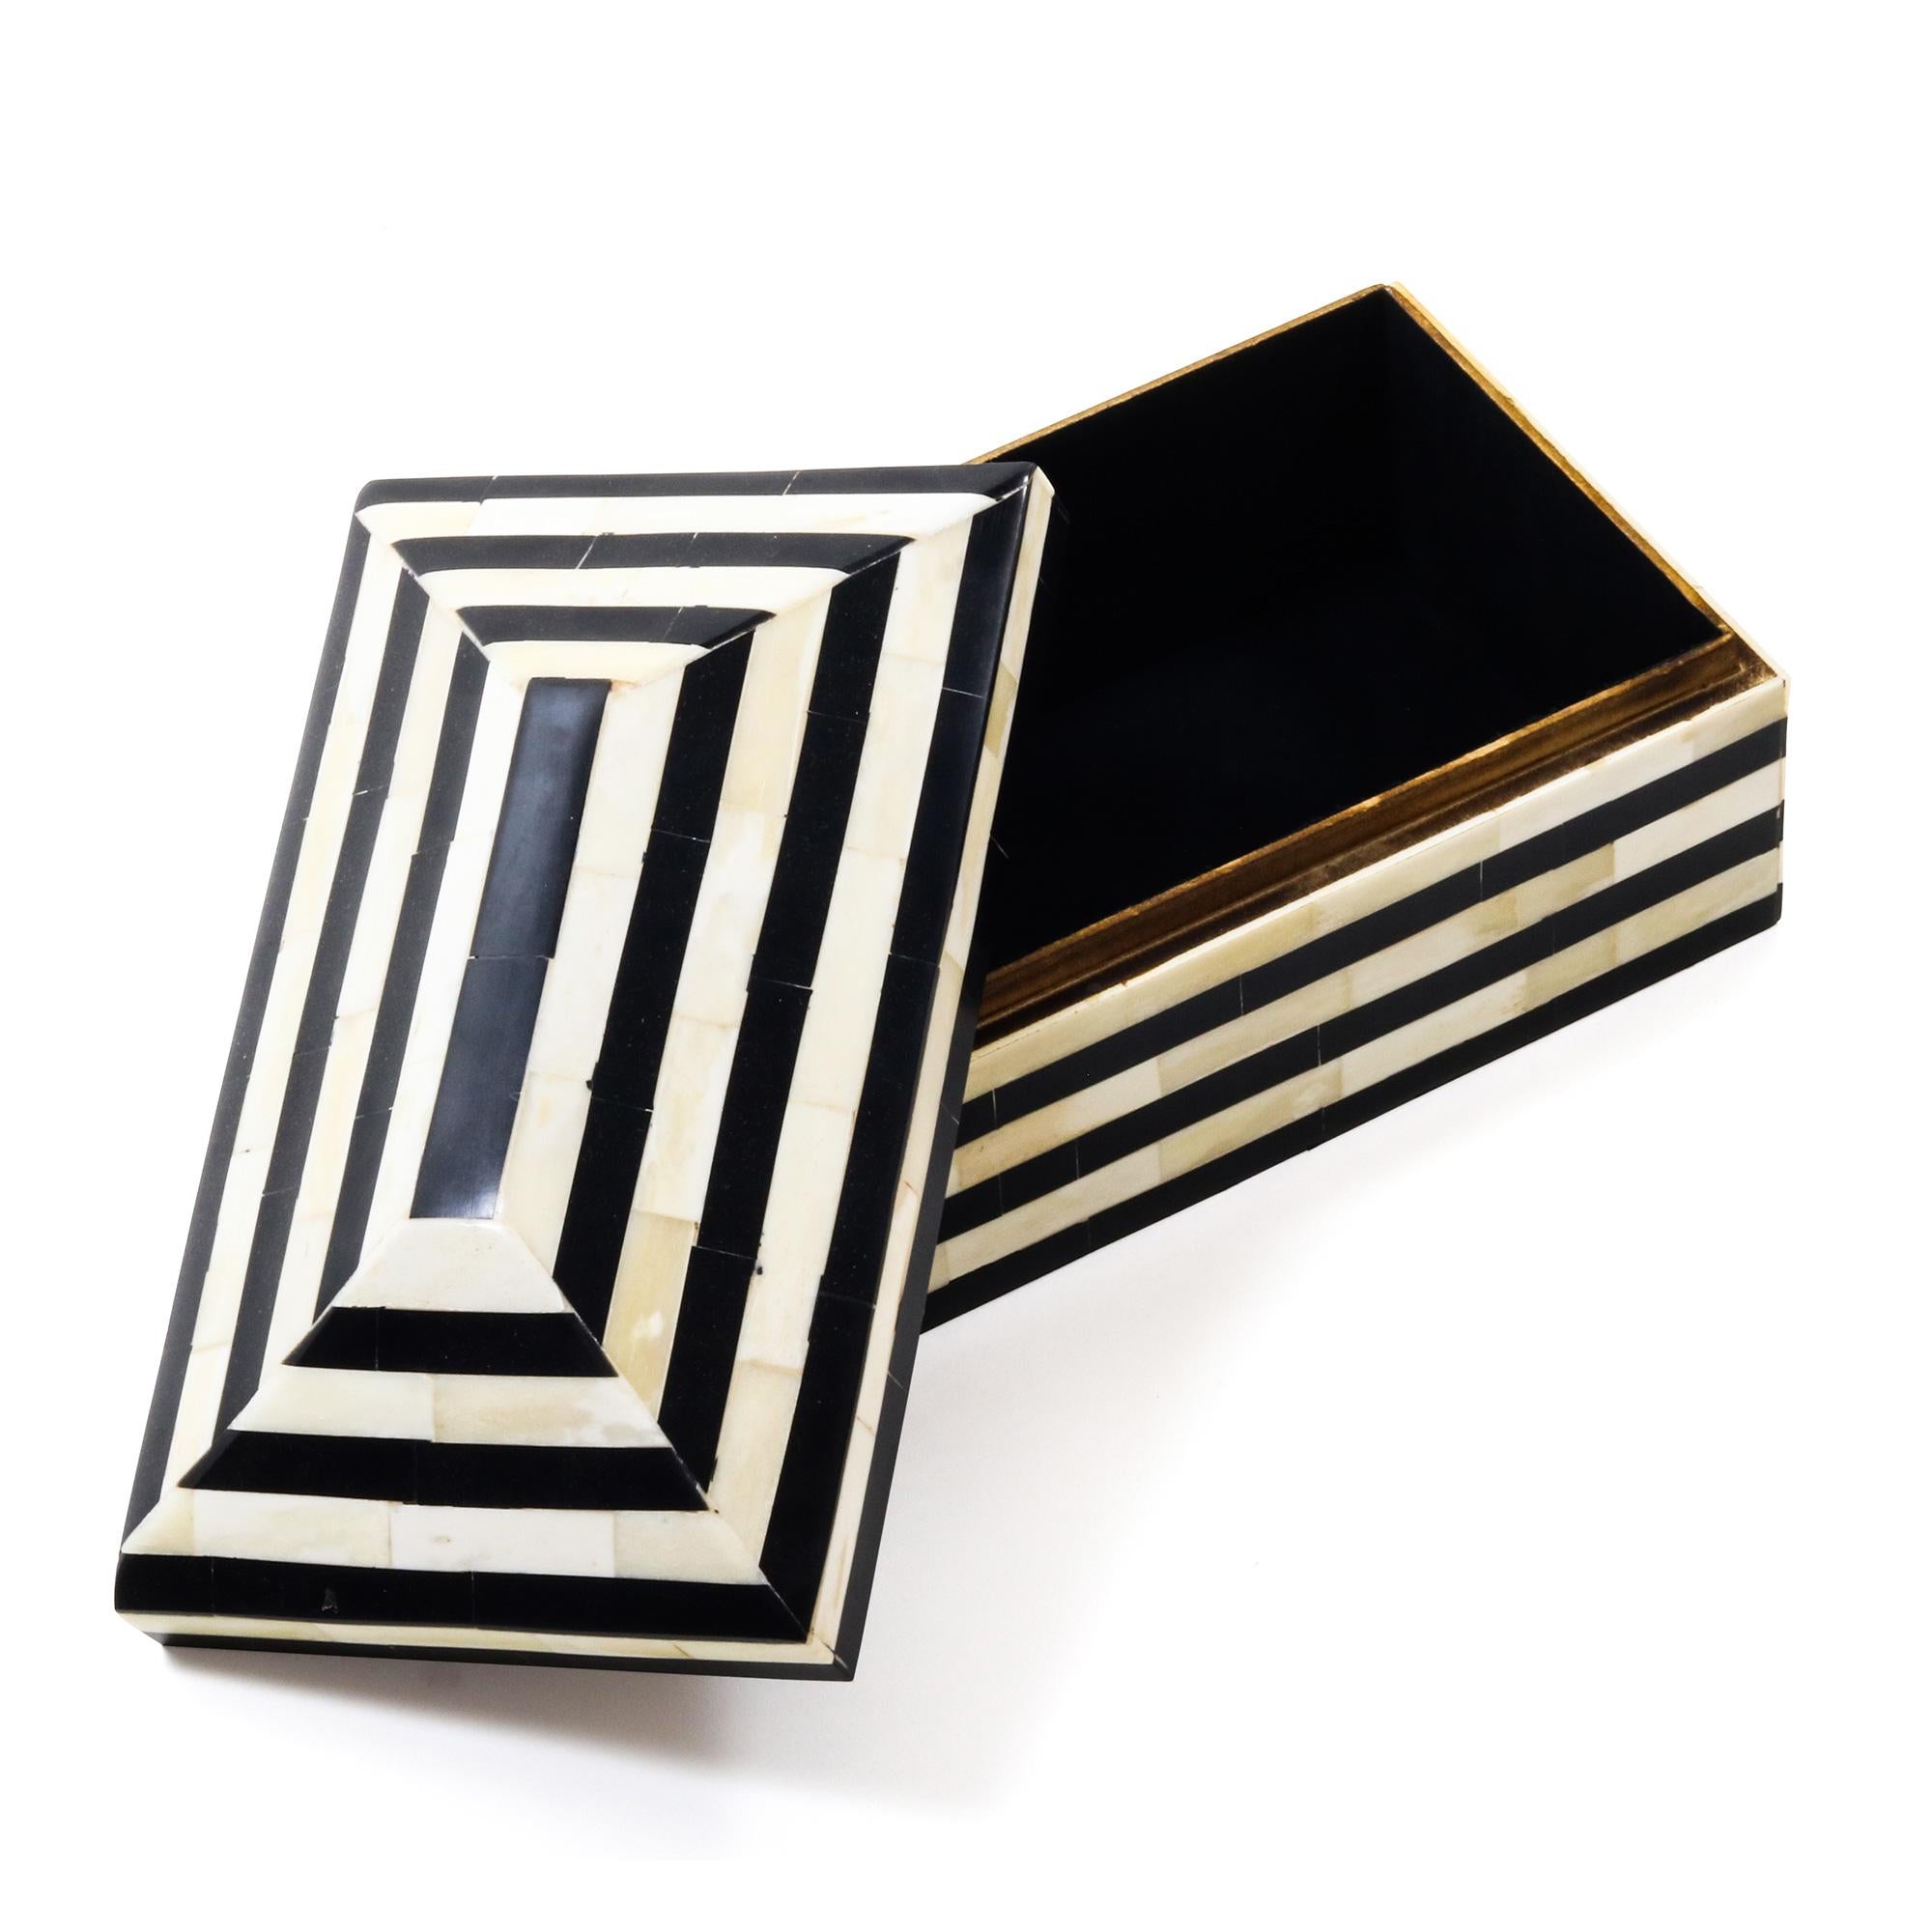 An ivory and black striped decorative resin and bone box.
     